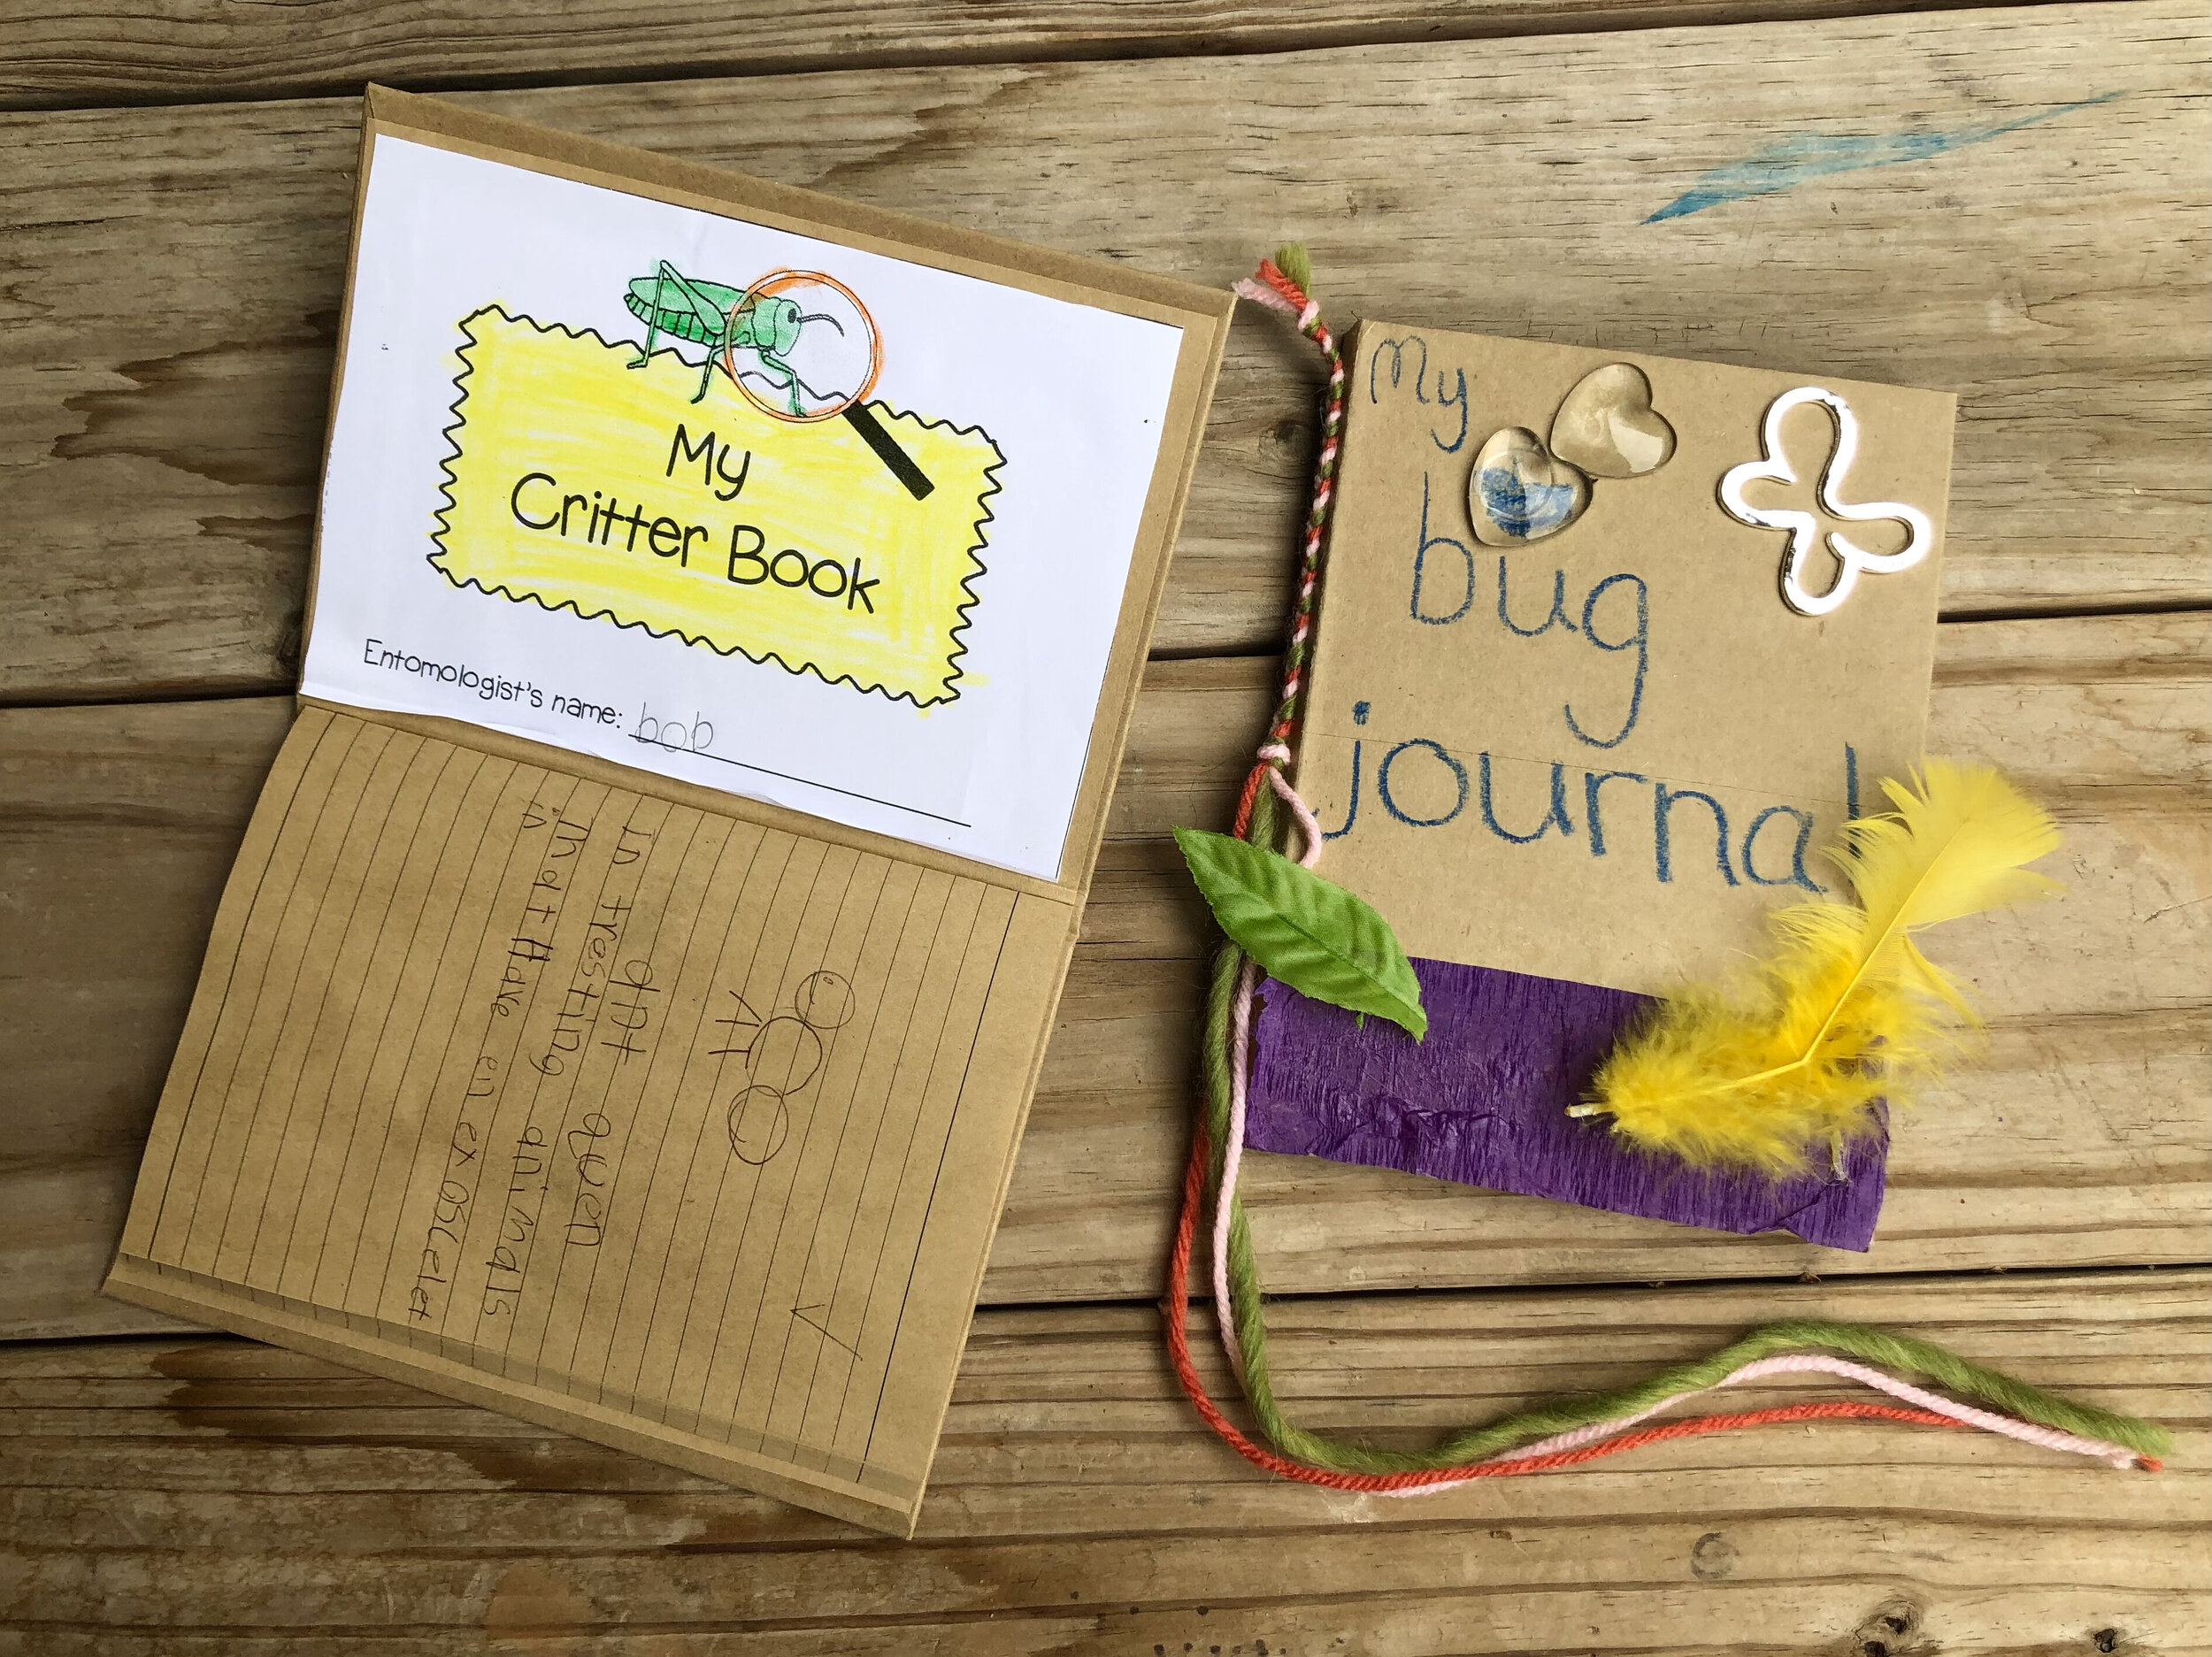   We created bug journals to document the characteristics of the insects we observed during the course of the week.  